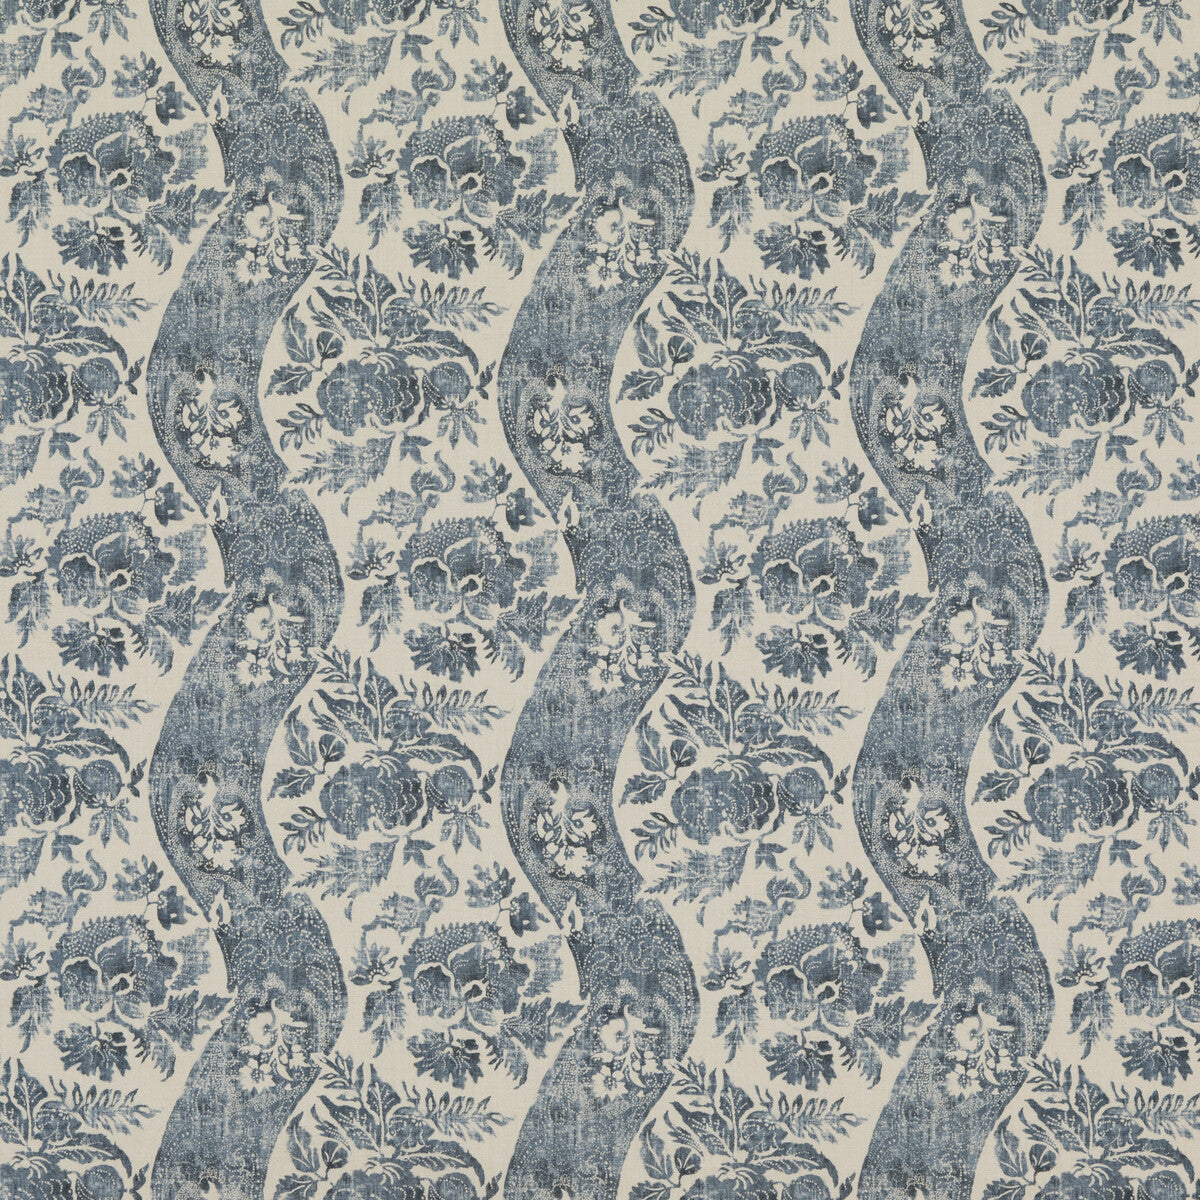 Caldbeck fabric in indigo/linen color - pattern BP10776.2.0 - by G P &amp; J Baker in the Signature Prints collection